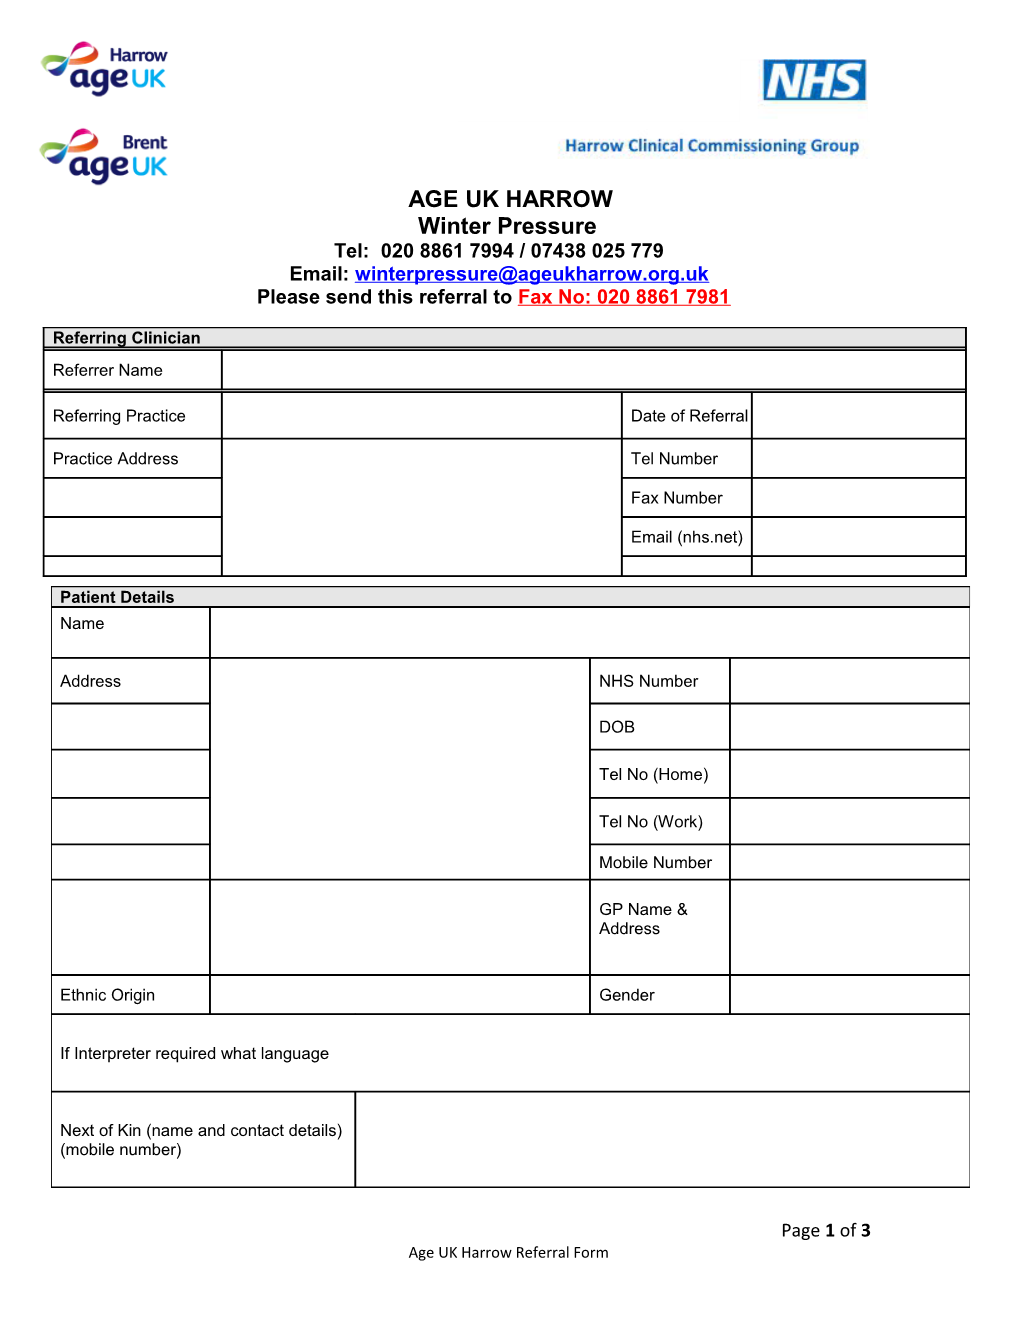 Age UK Harrow Referral - Falls Prevent Support & Home Support